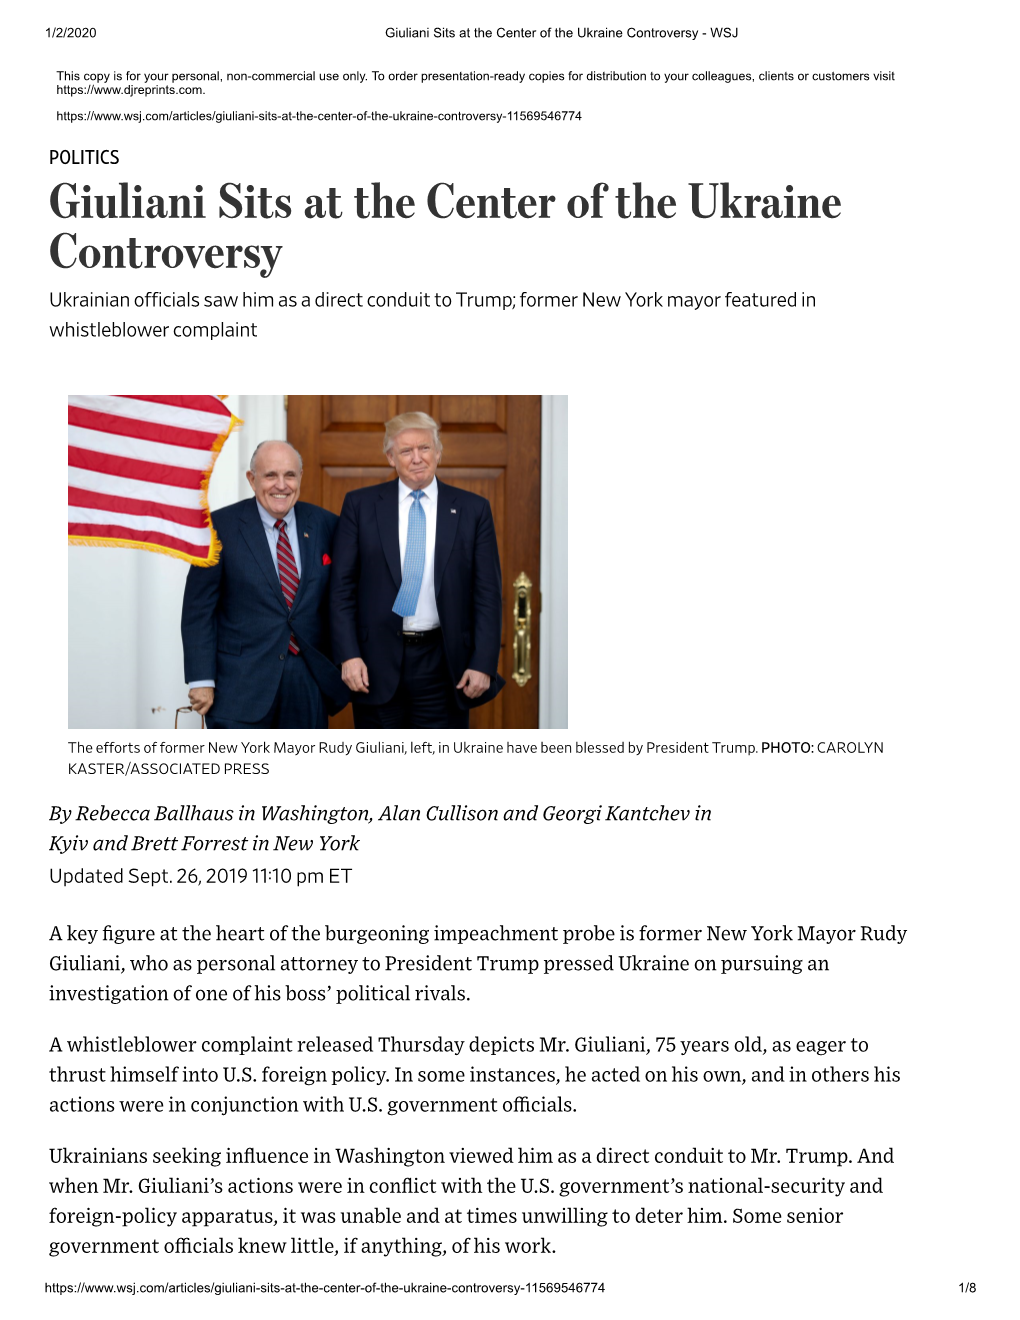 Giuliani Sits at the Center of the Ukraine Controversy - WSJ